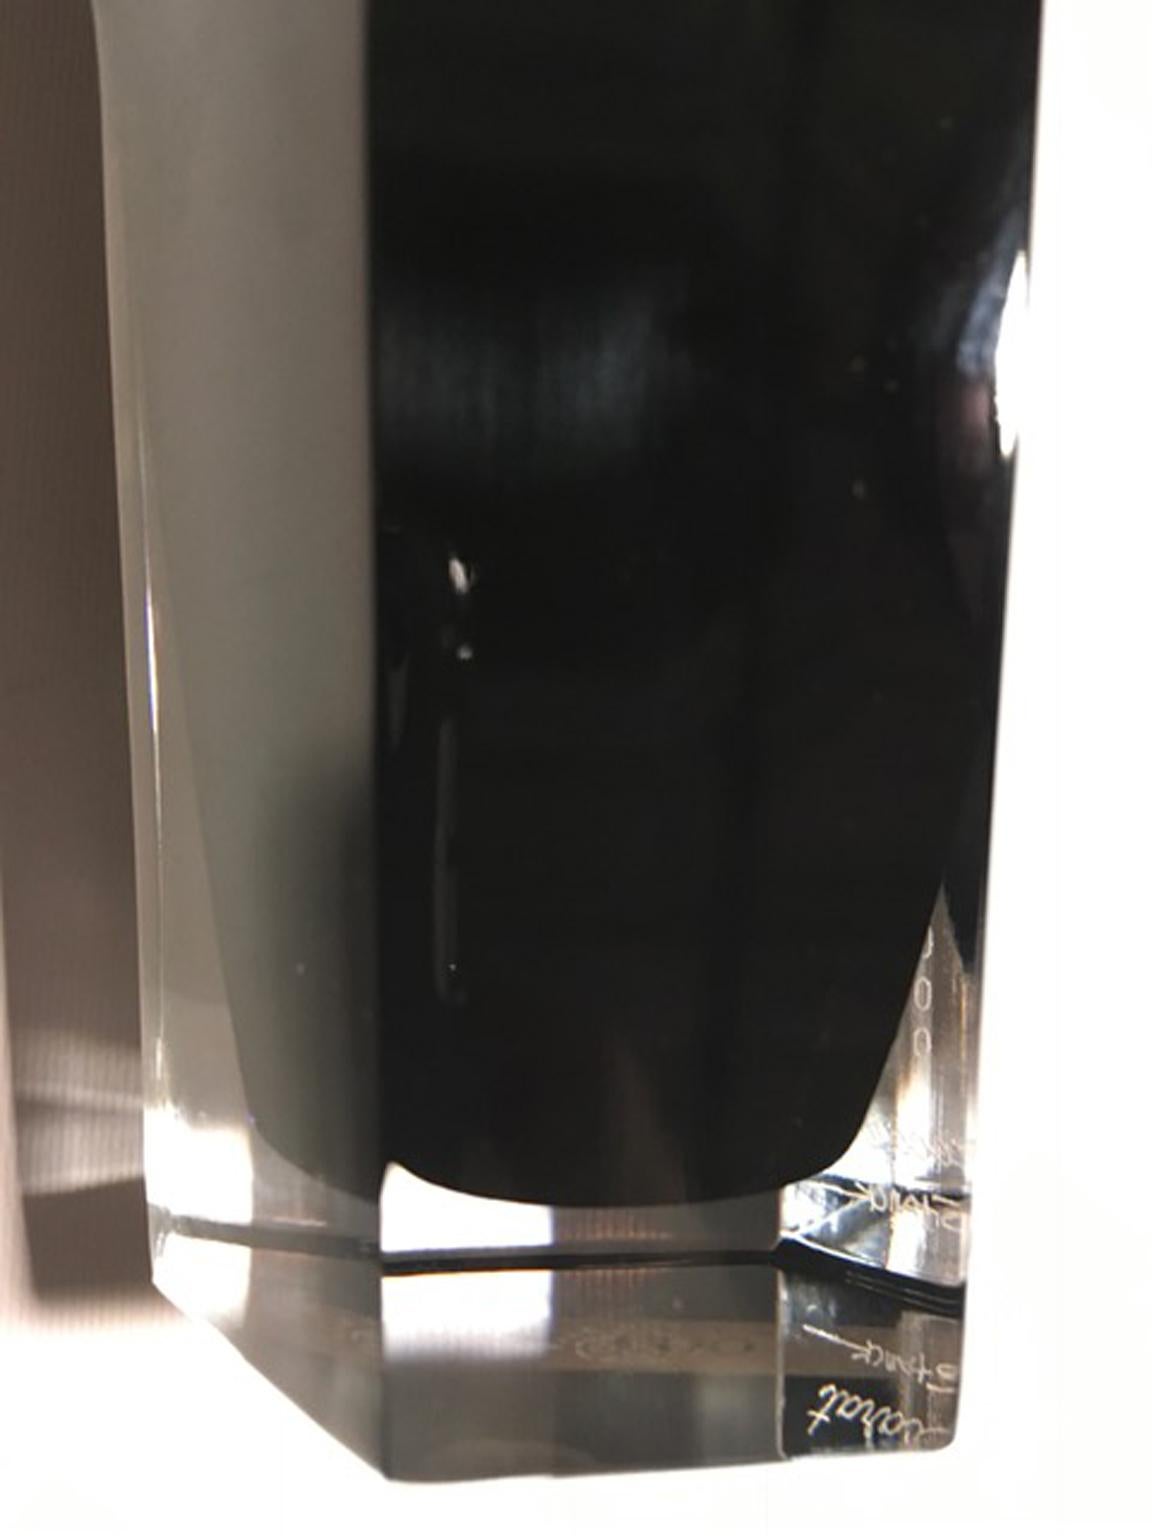 Baccarat First Numbered of Limited Edition Black Crystal by Stark Glass or Vase 6